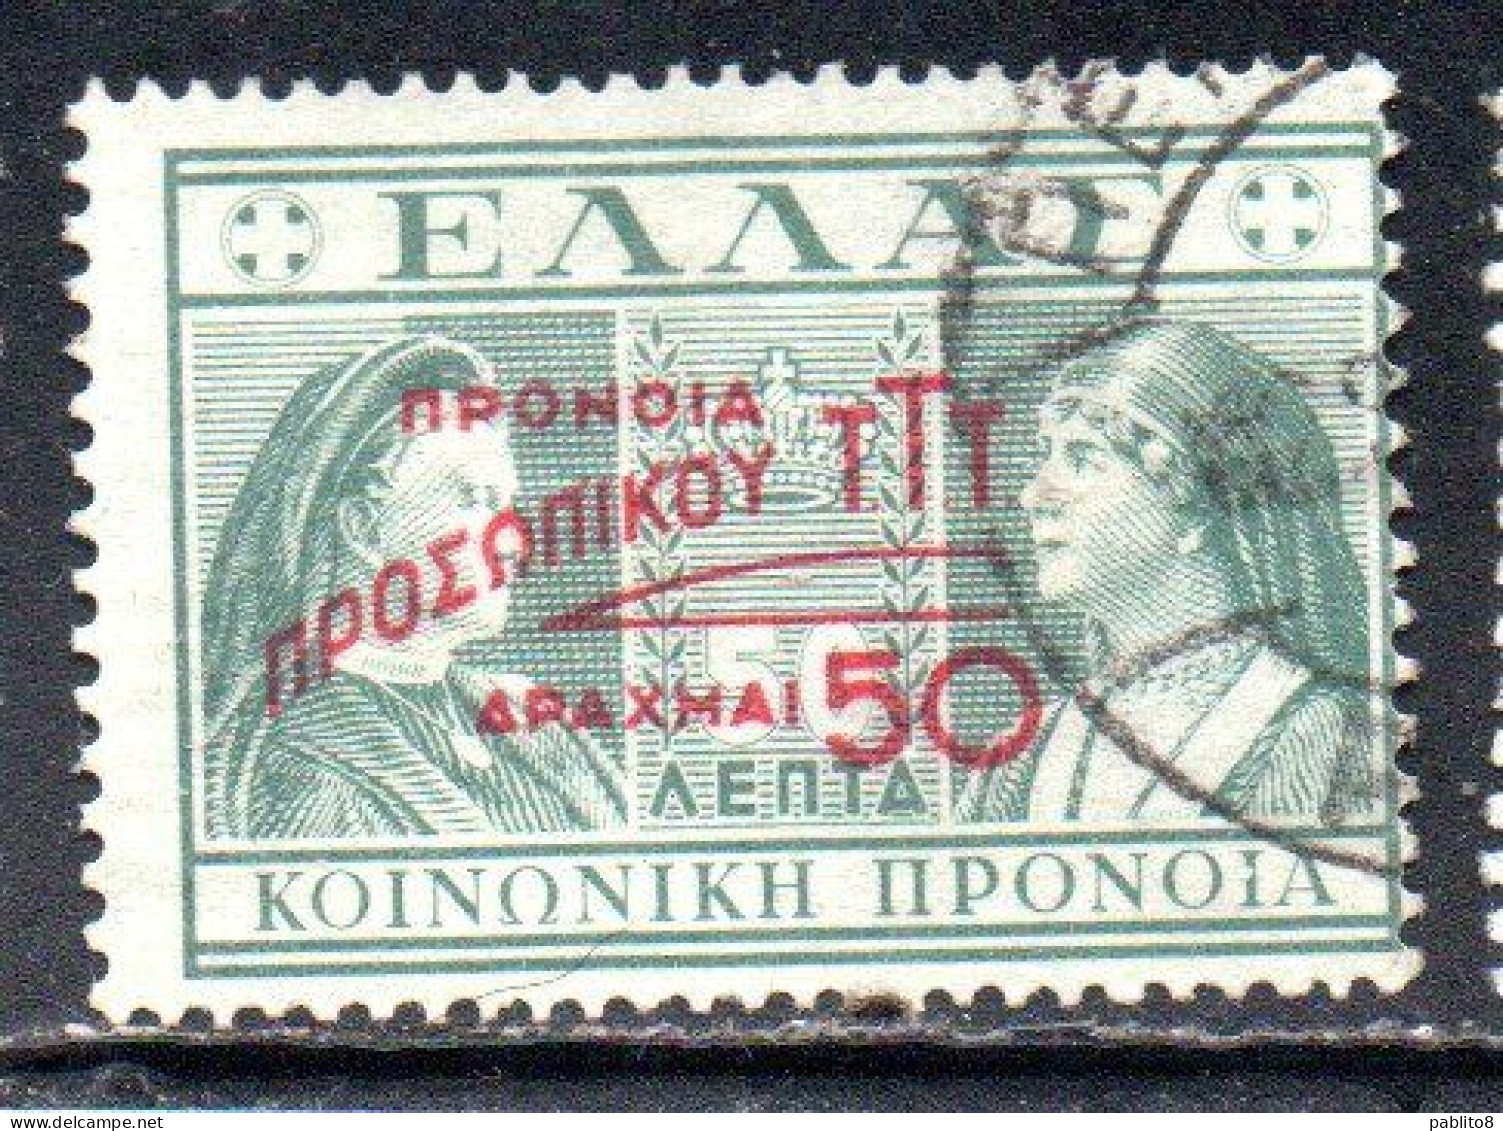 GREECE GRECIA ELLAS 1947 POSTAL TAX STAMPS TUBERCULOSIS SURCHARGED 50d On 50l USED USATO OBLITERE' - Fiscali